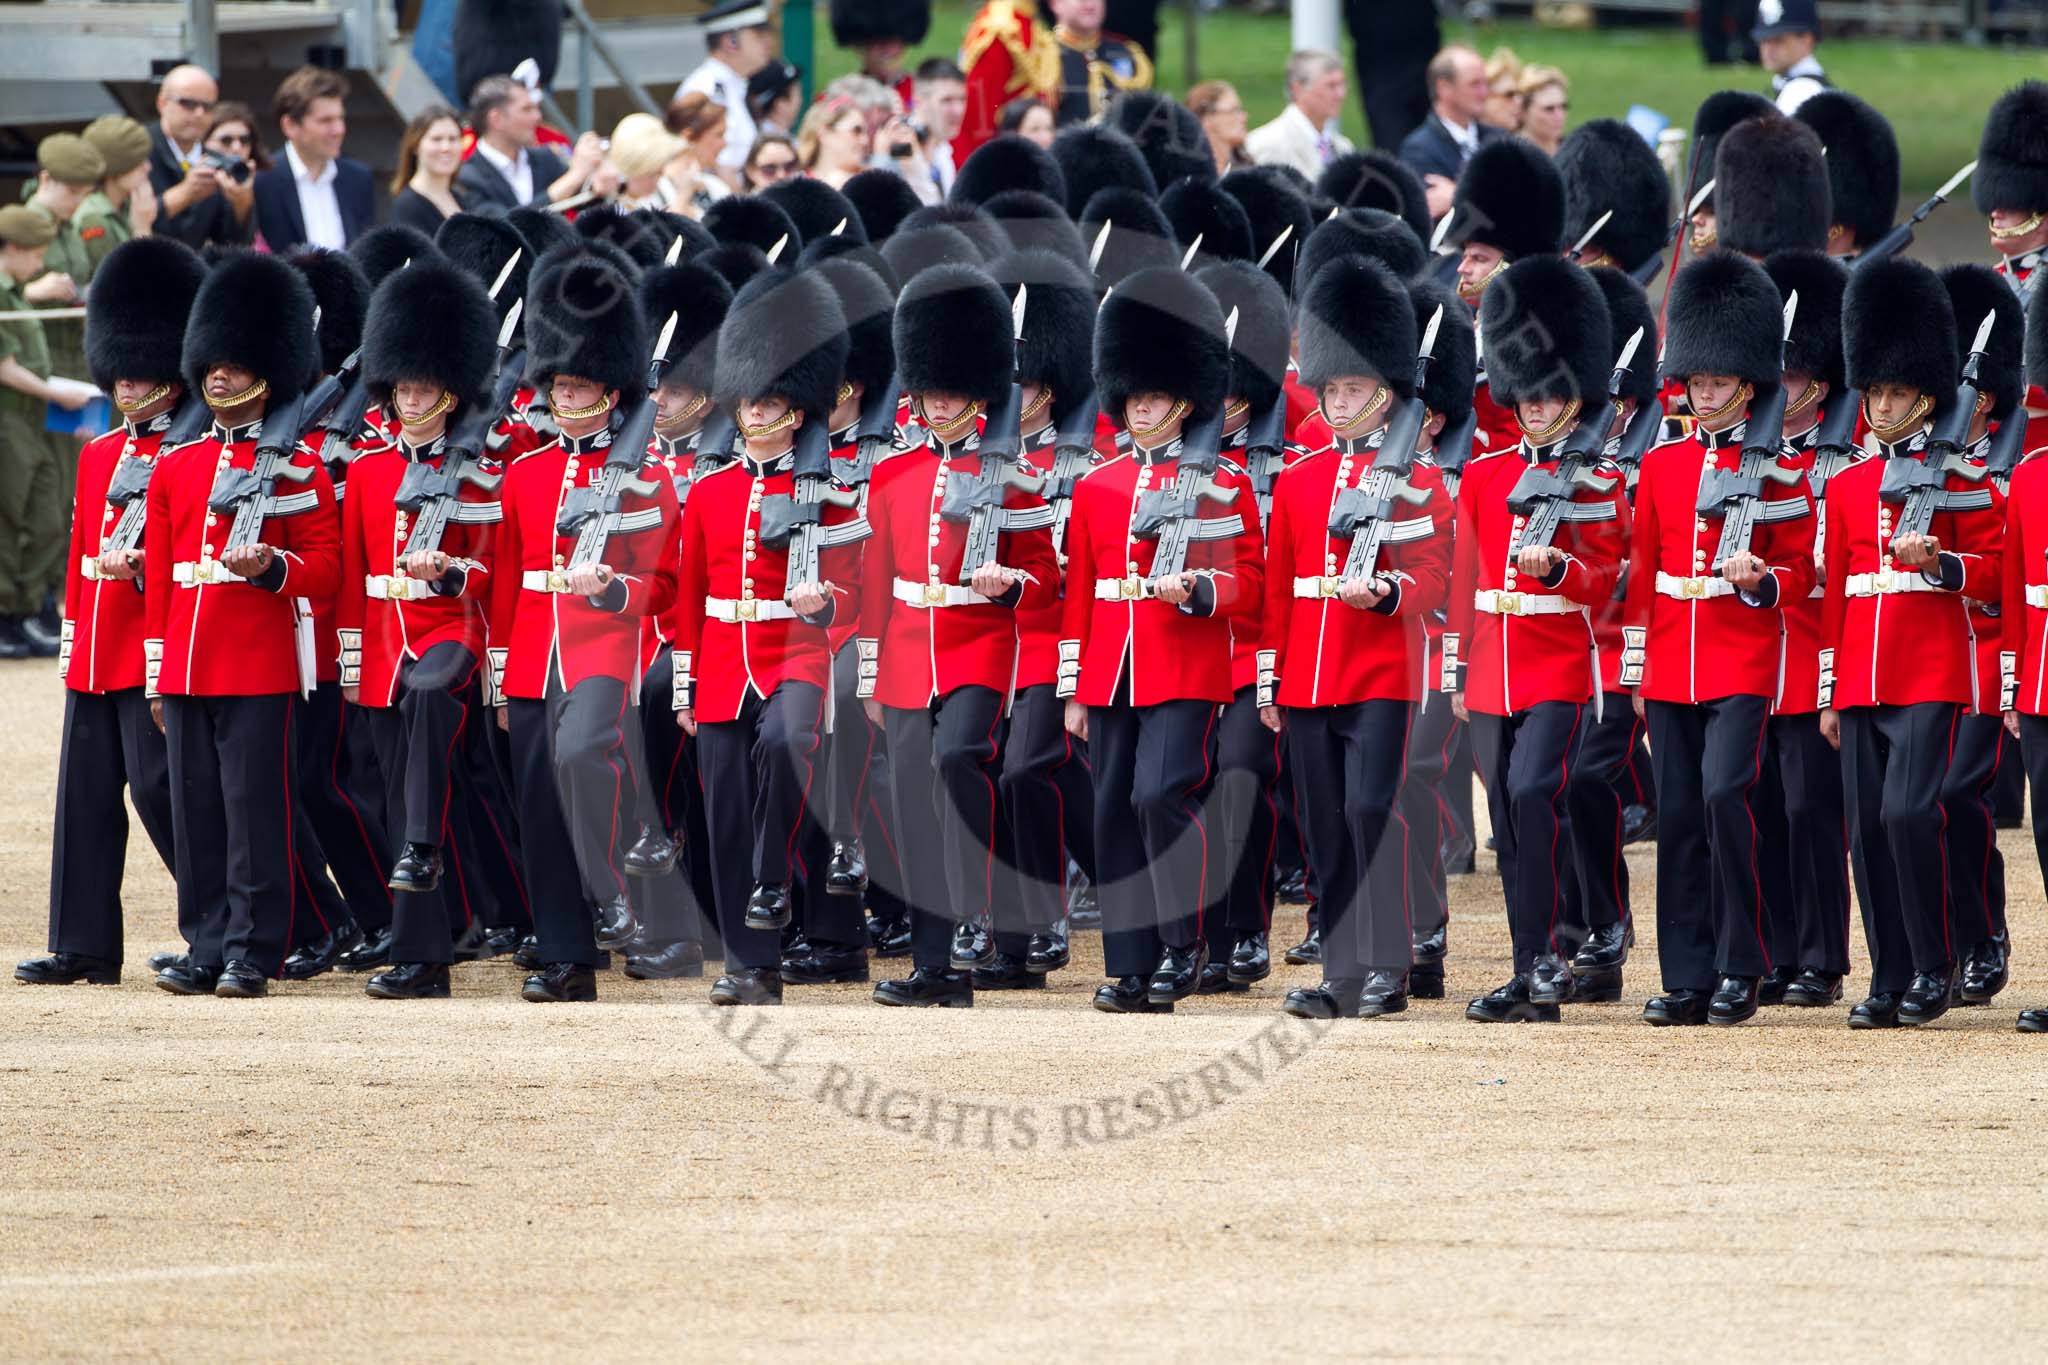 The Colonel's Review 2011: The March Past by the Foot Guards in slow time. Here No. 3 Guard, F Company Scots Guards..
Horse Guards Parade, Westminster,
London SW1,

United Kingdom,
on 04 June 2011 at 11:32, image #157